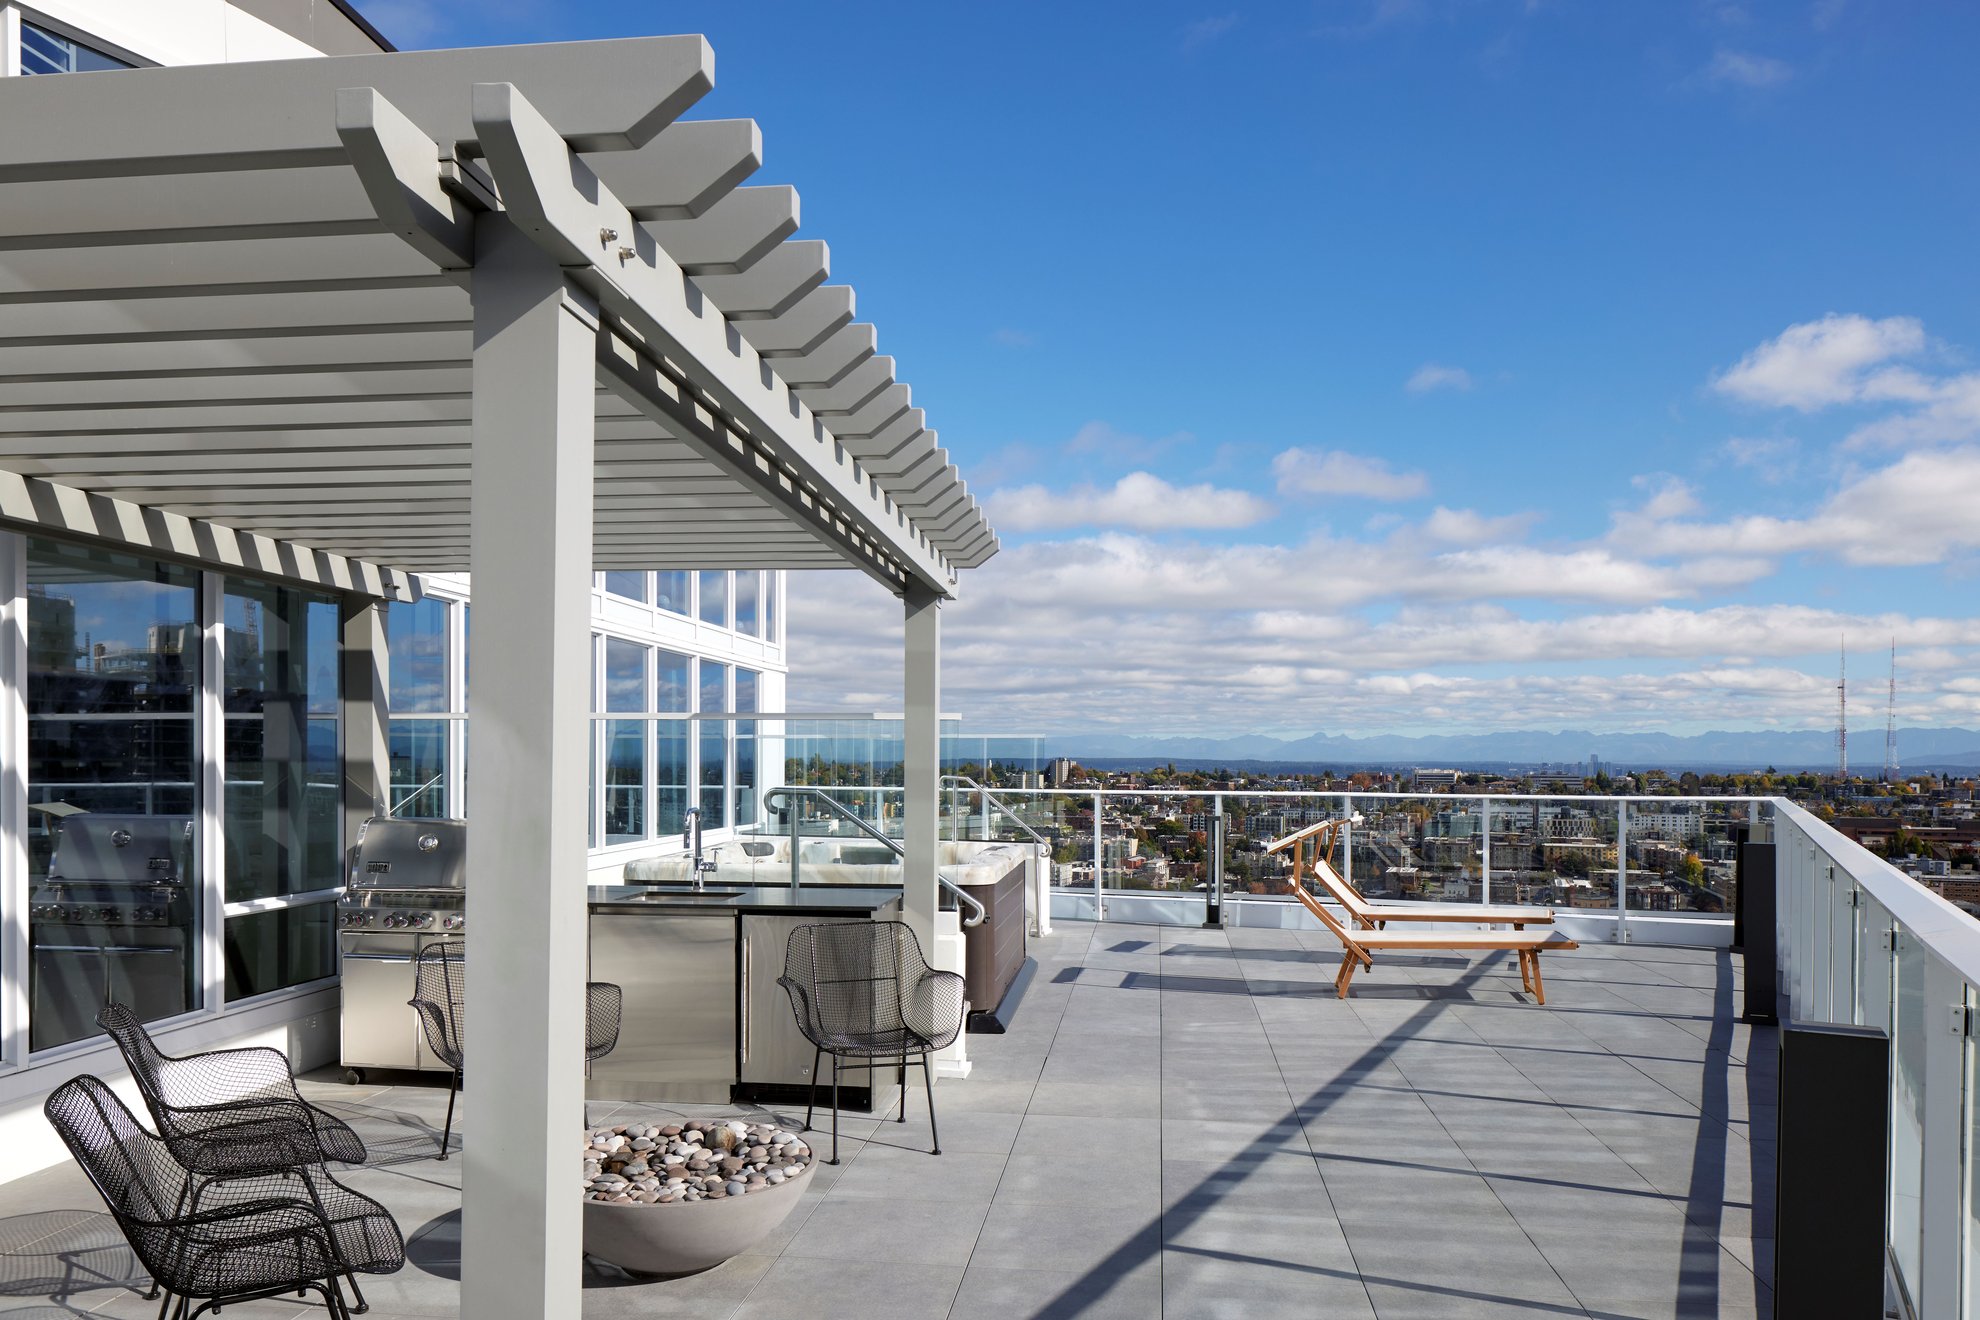 spacious outdoor rooftop terrace with seating options, outdoor kitchen, city view at the penthouse level seattle south lake union.jpg